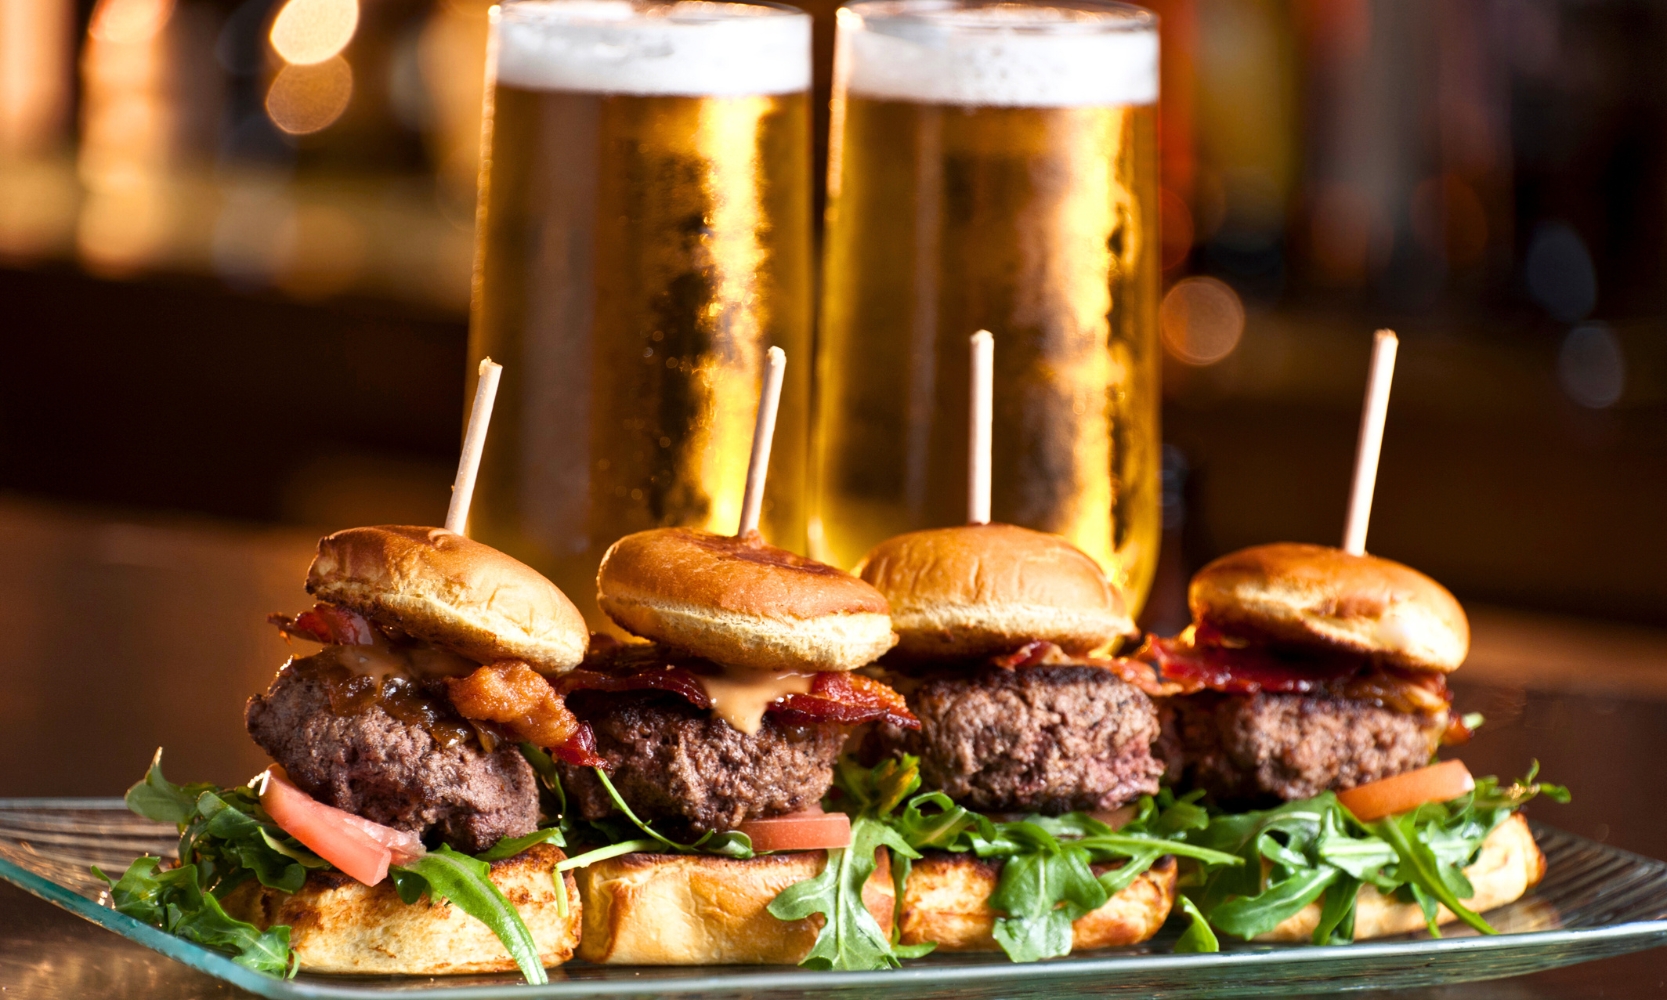 An image of four mini burgers and two pint beers at a brewery